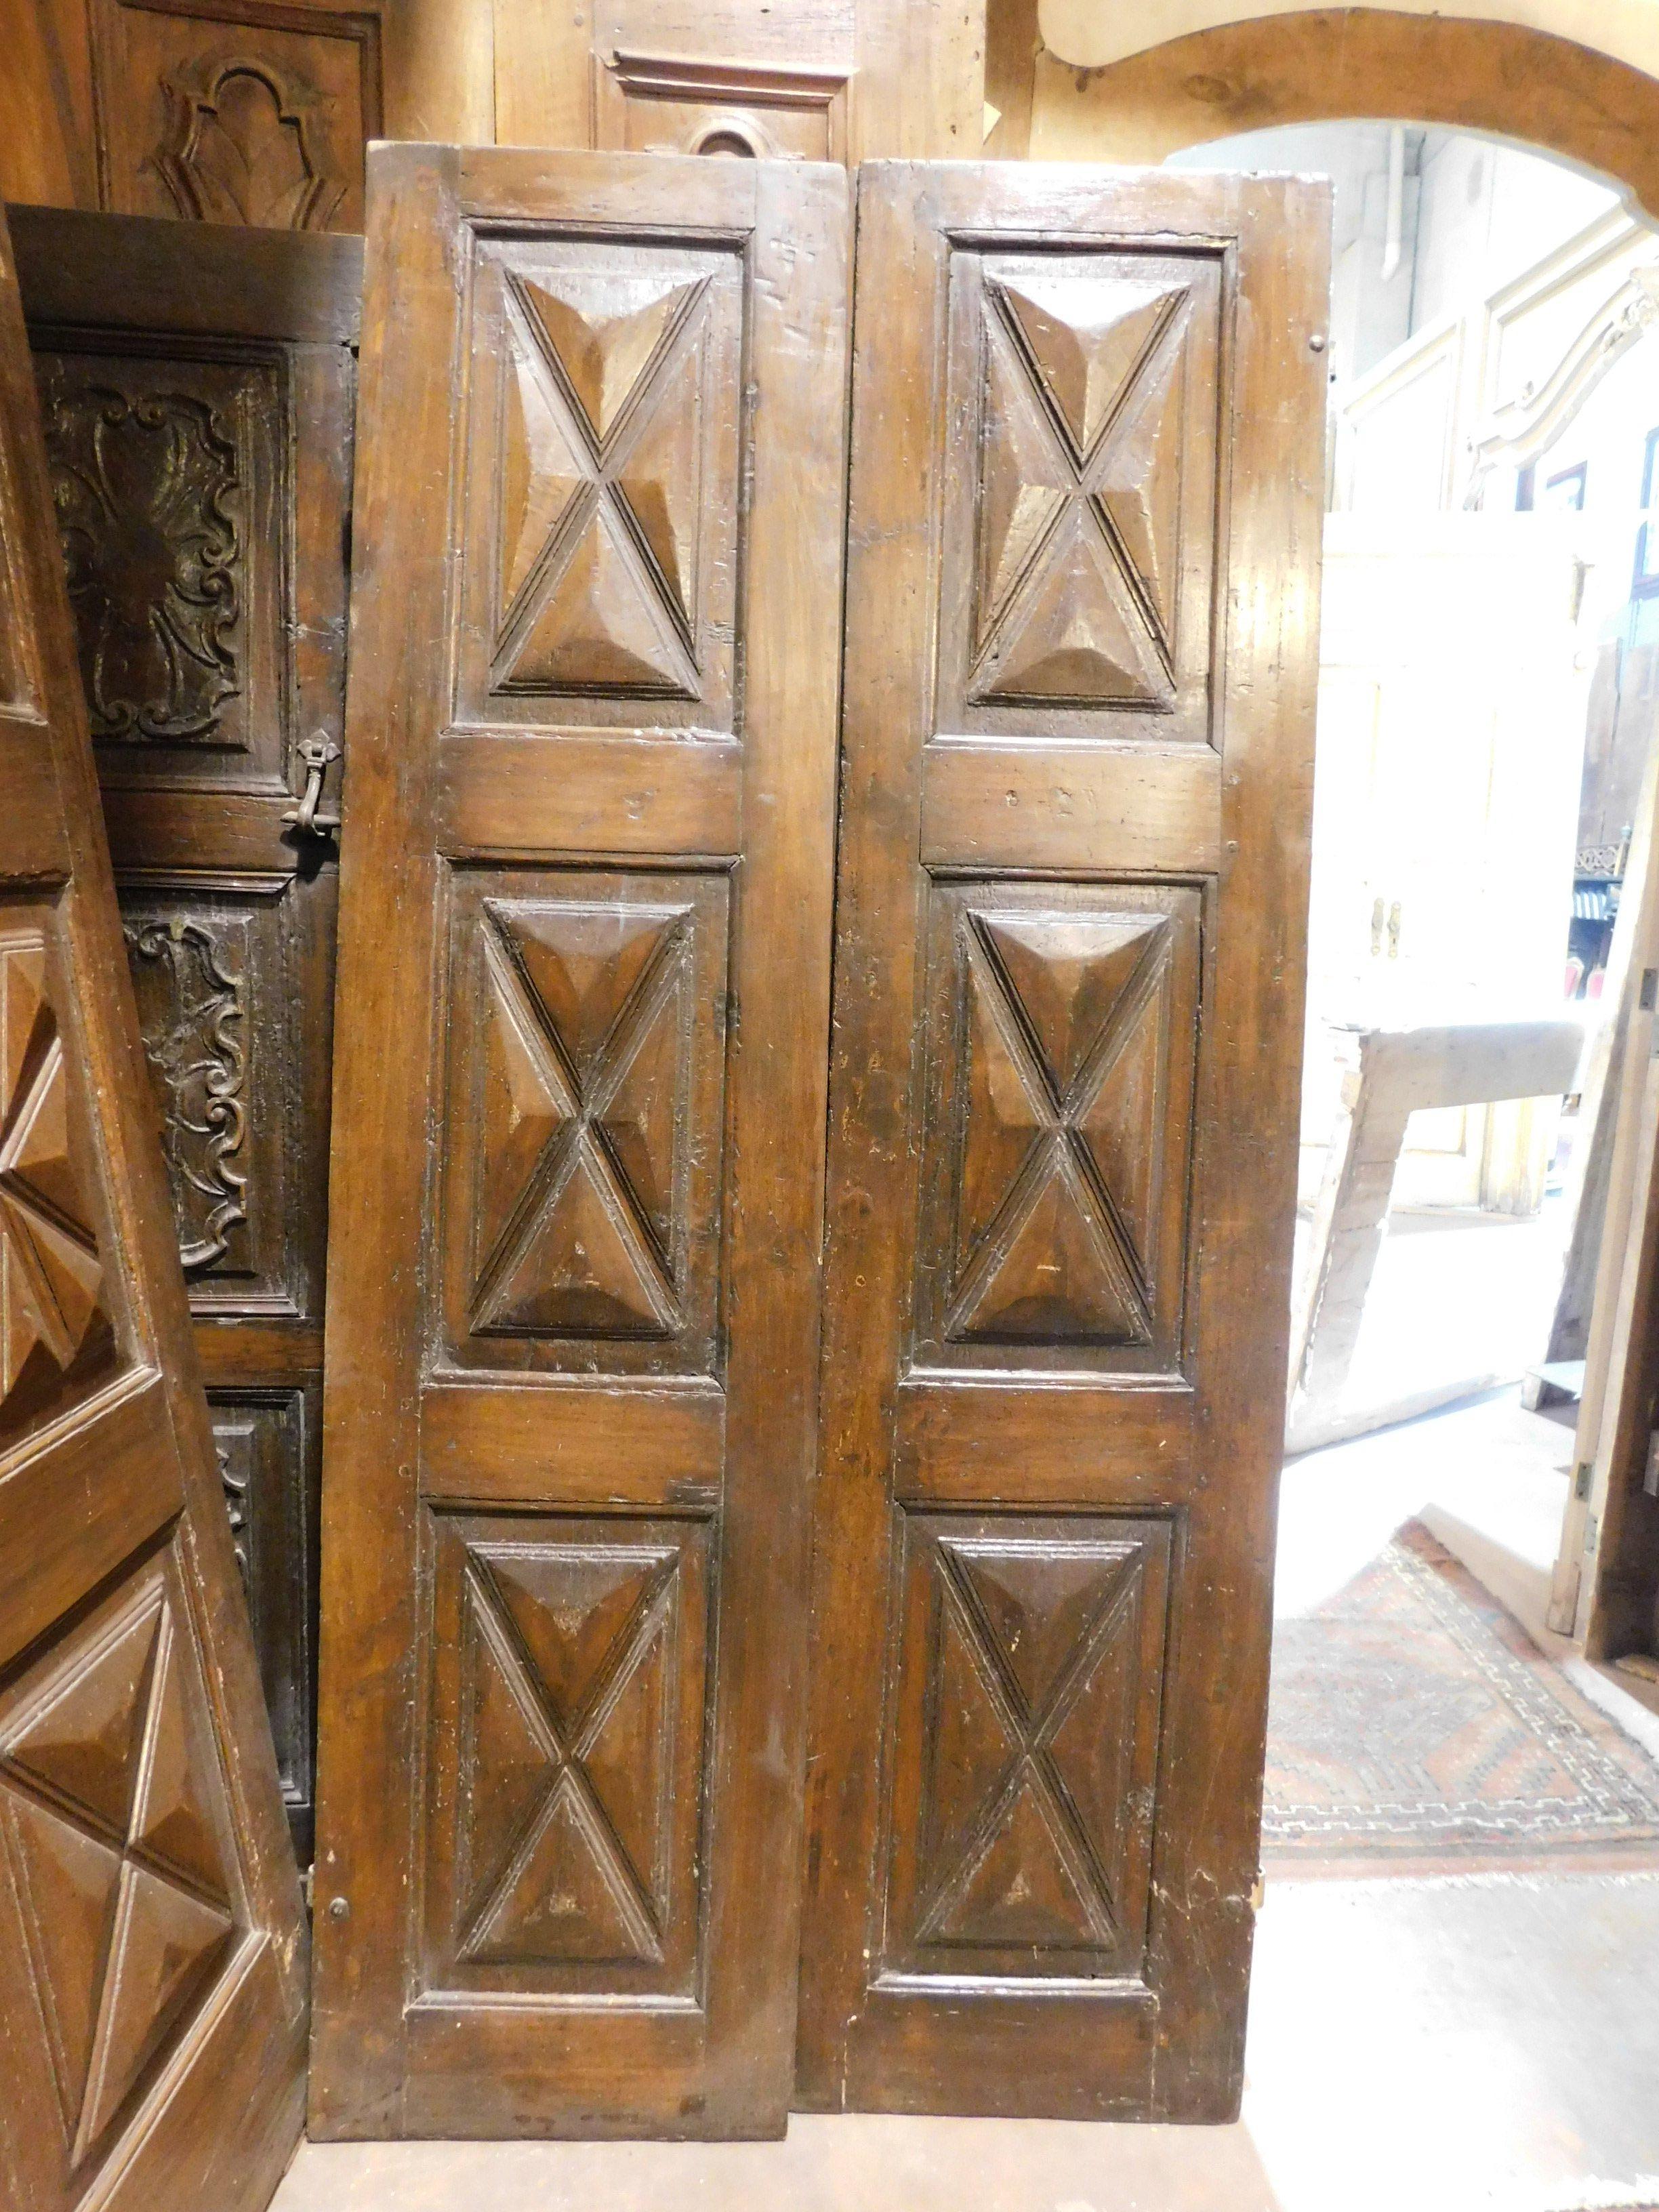 Ancient double-wing poplar door, hand-carved with a diamond-point shape, from the original 17th century therefore very ancient, of great value and high antiques, produced entirely by hand by artisans in Italy with diamond-point panels, built for a